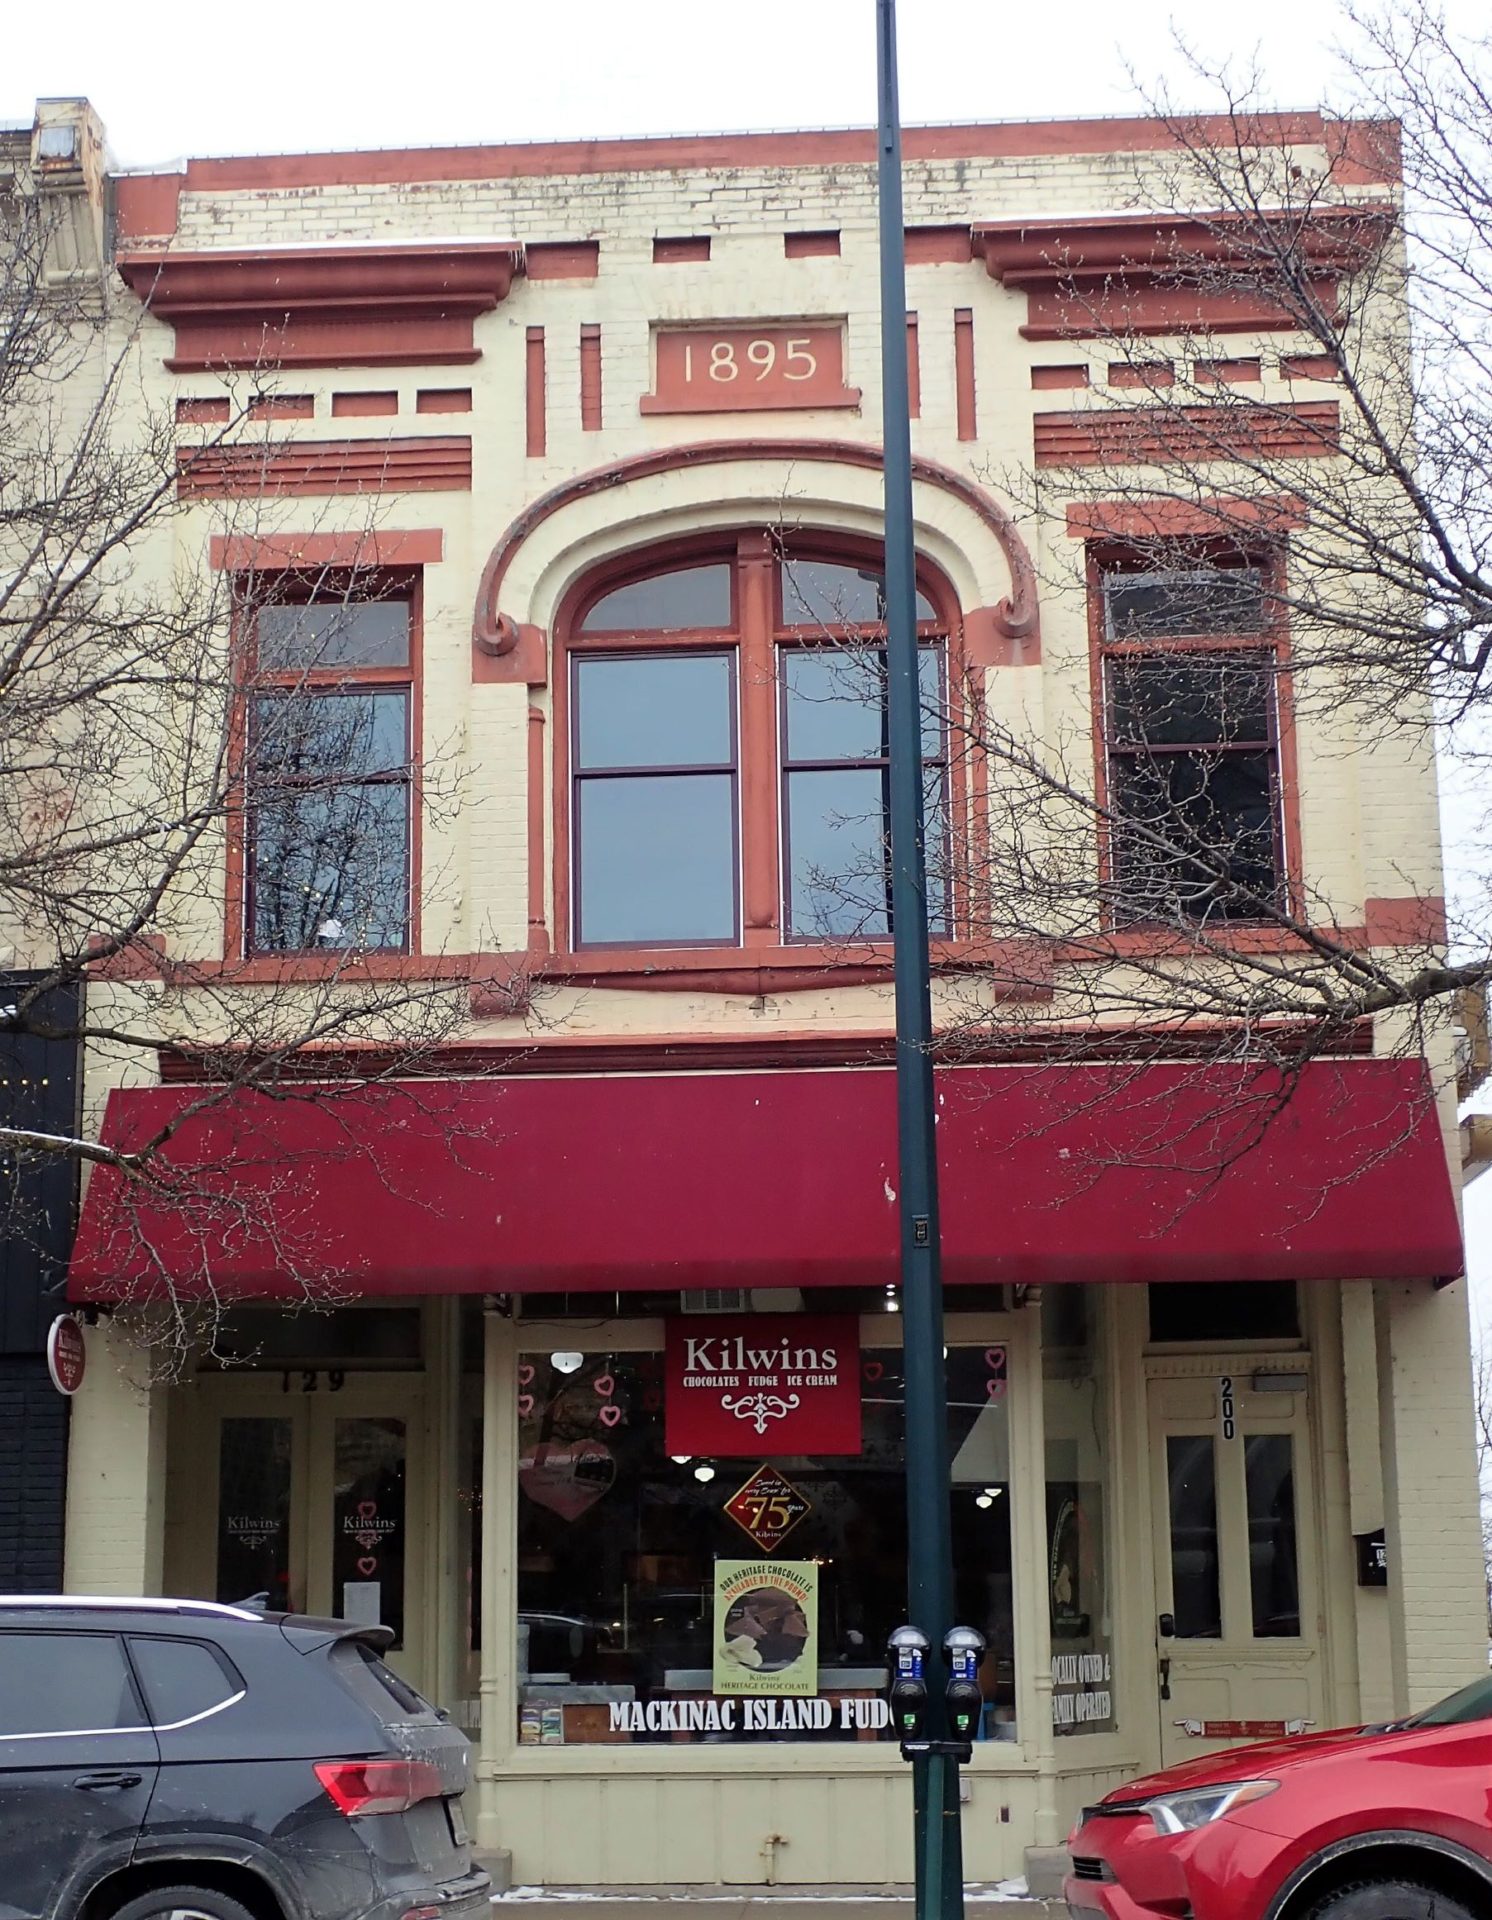 Kilwin's Chocolate Shop in Traverse City